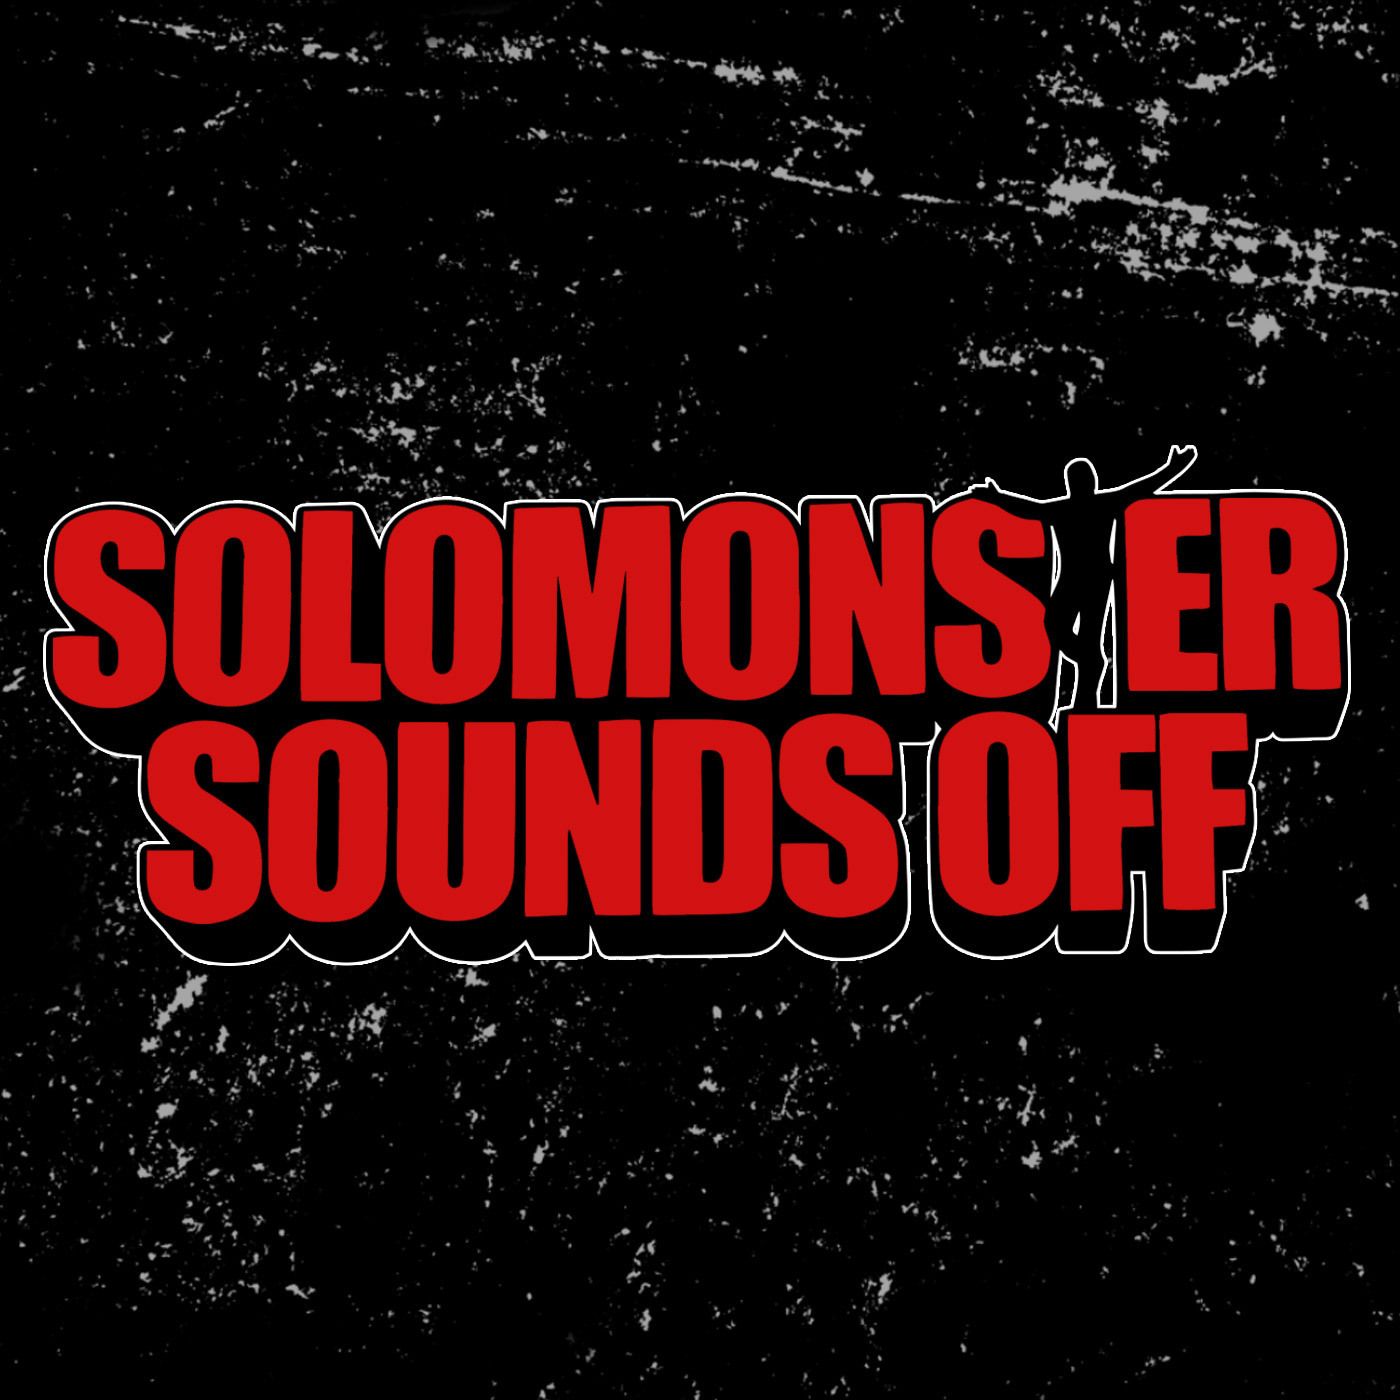 Solomonster Sounds Off / Sound Off Extra - ULTIMATE WARRIOR DARK SIDE OF  THE RING + A&E REVIEWS!